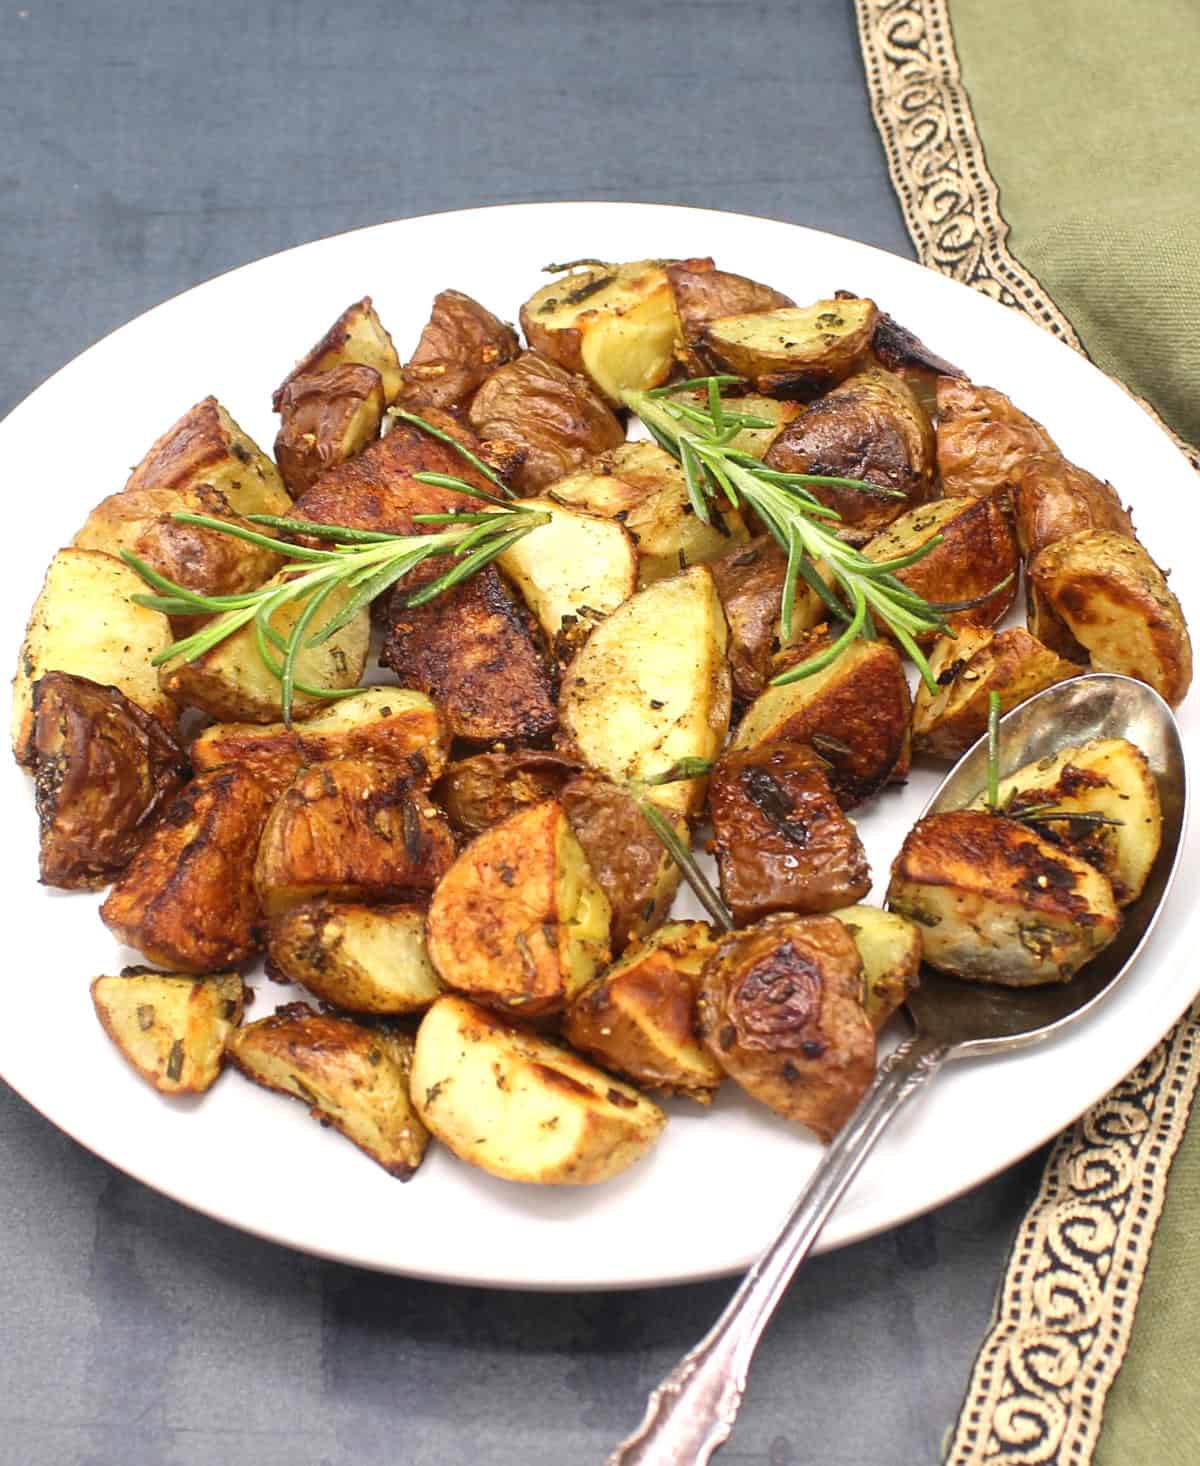 Rosemary roasted potatoes on plate with sprigs of rosemary and a spoon.